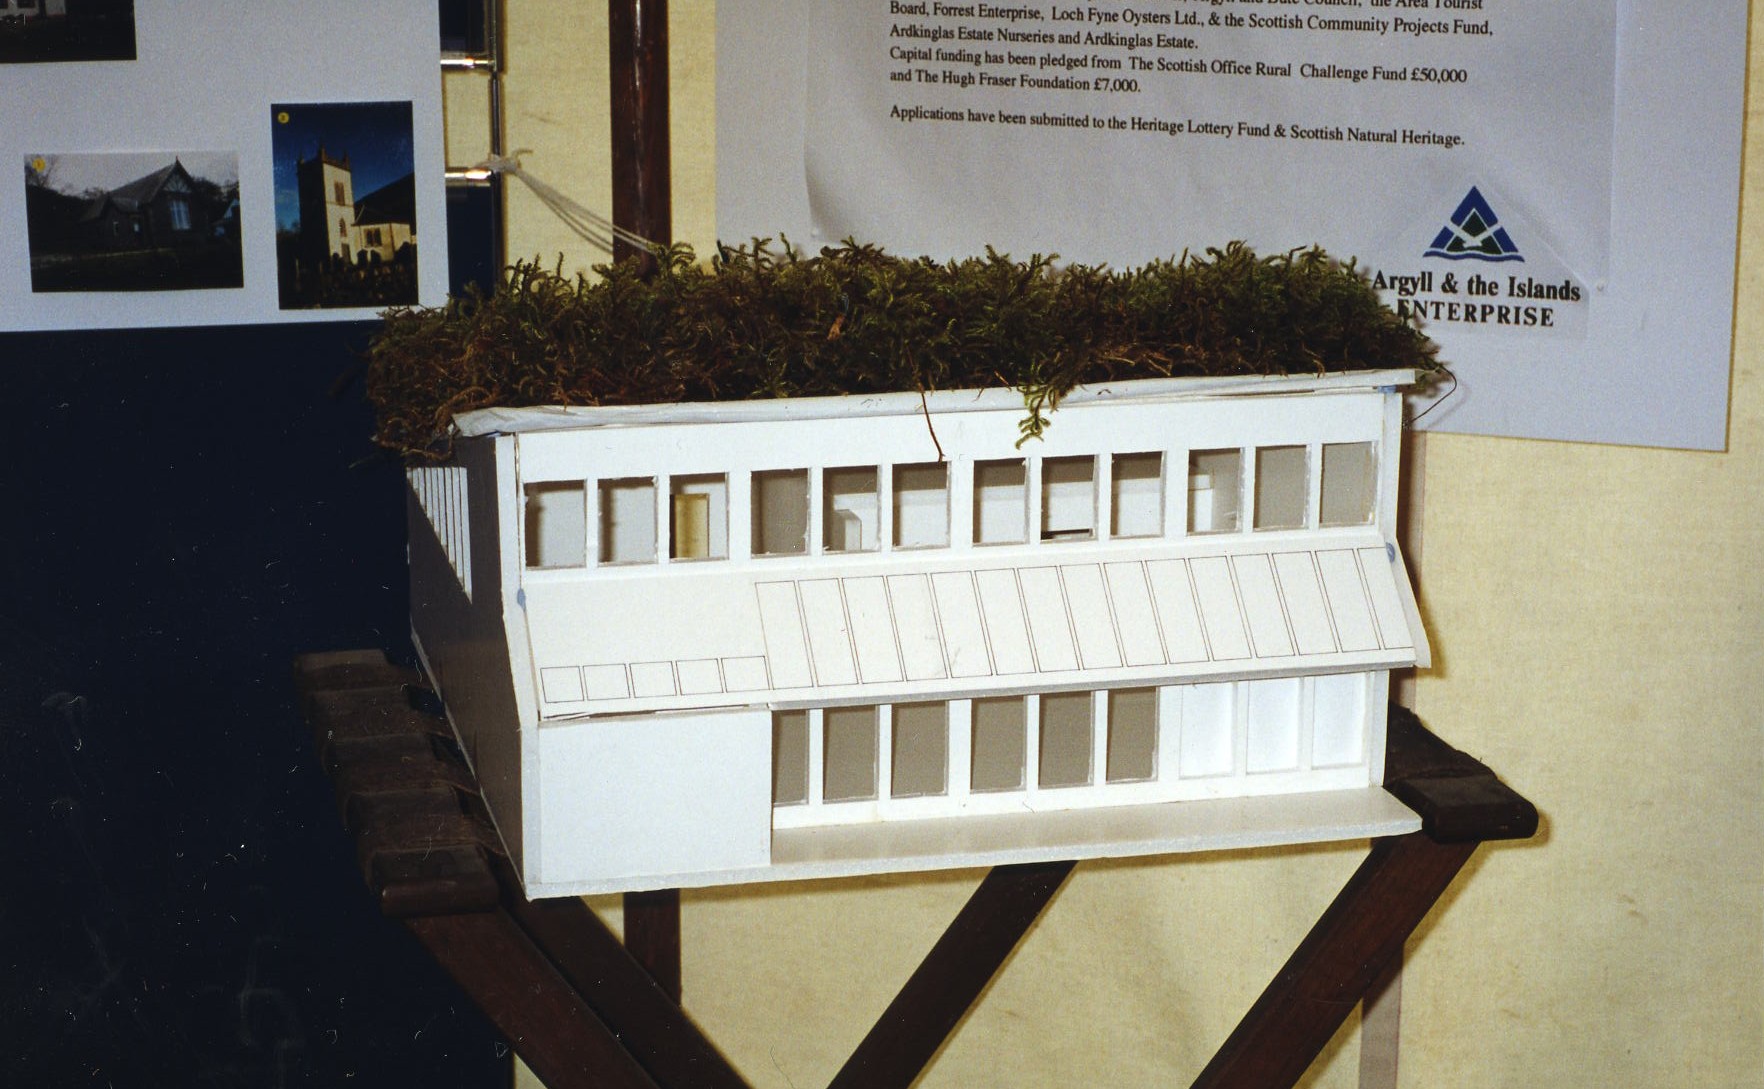 Model of Proposed Building